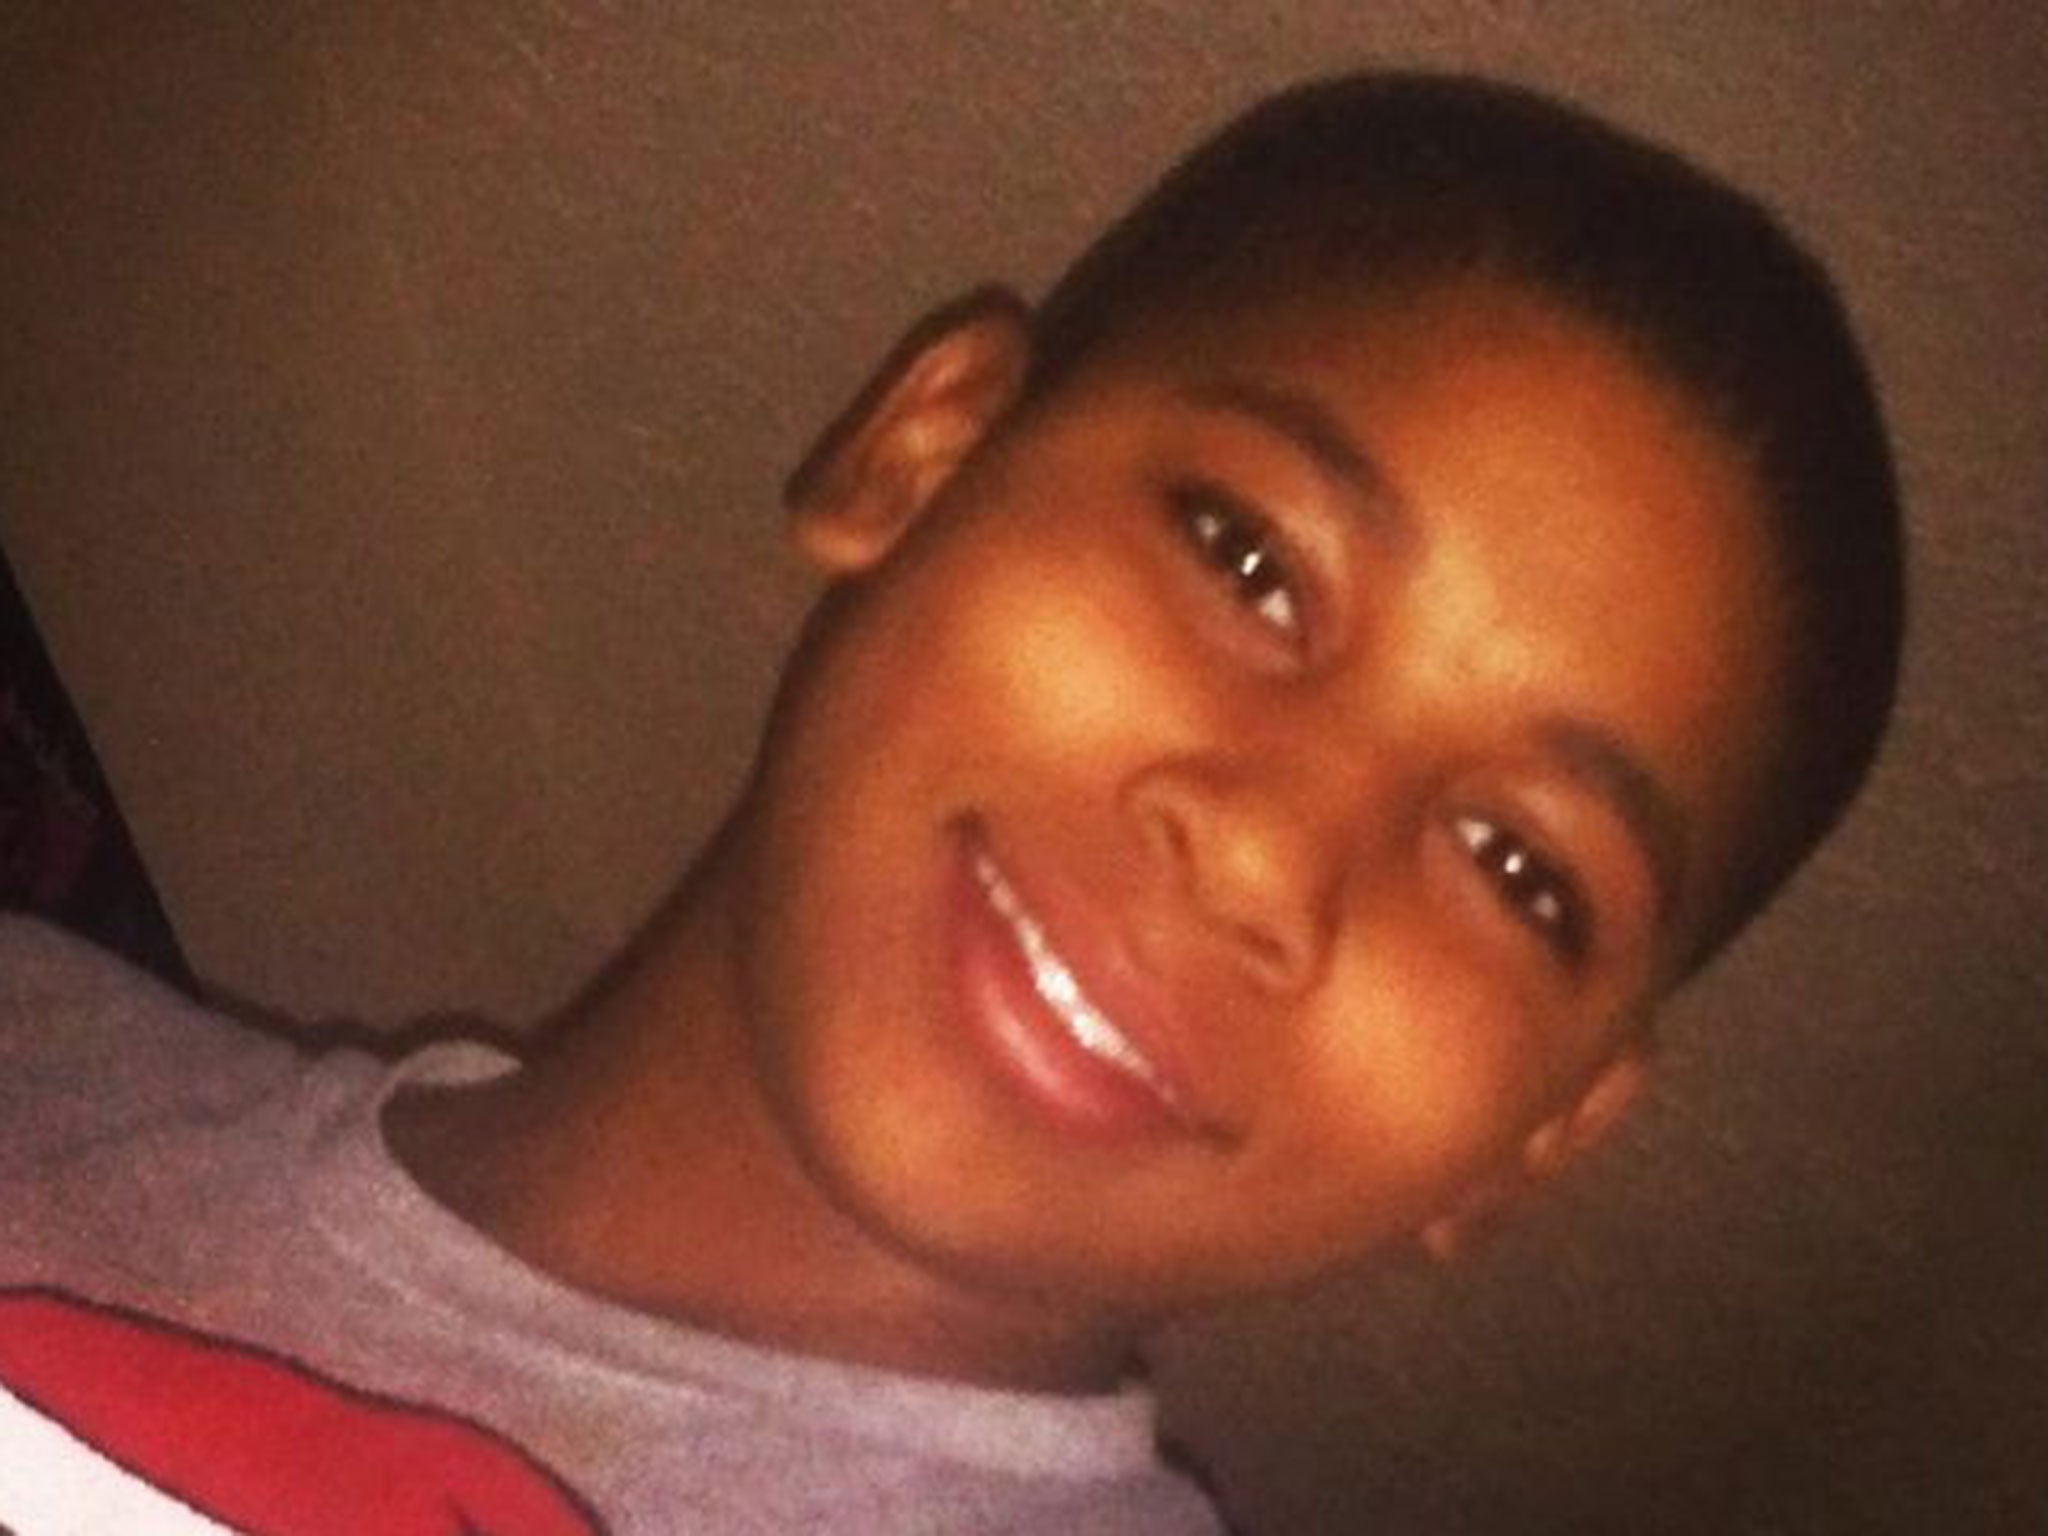 Tamir Rice was 12 when he was fatally shot by Cleveland police officer Timothy Loehmann on 22 November, 2014.